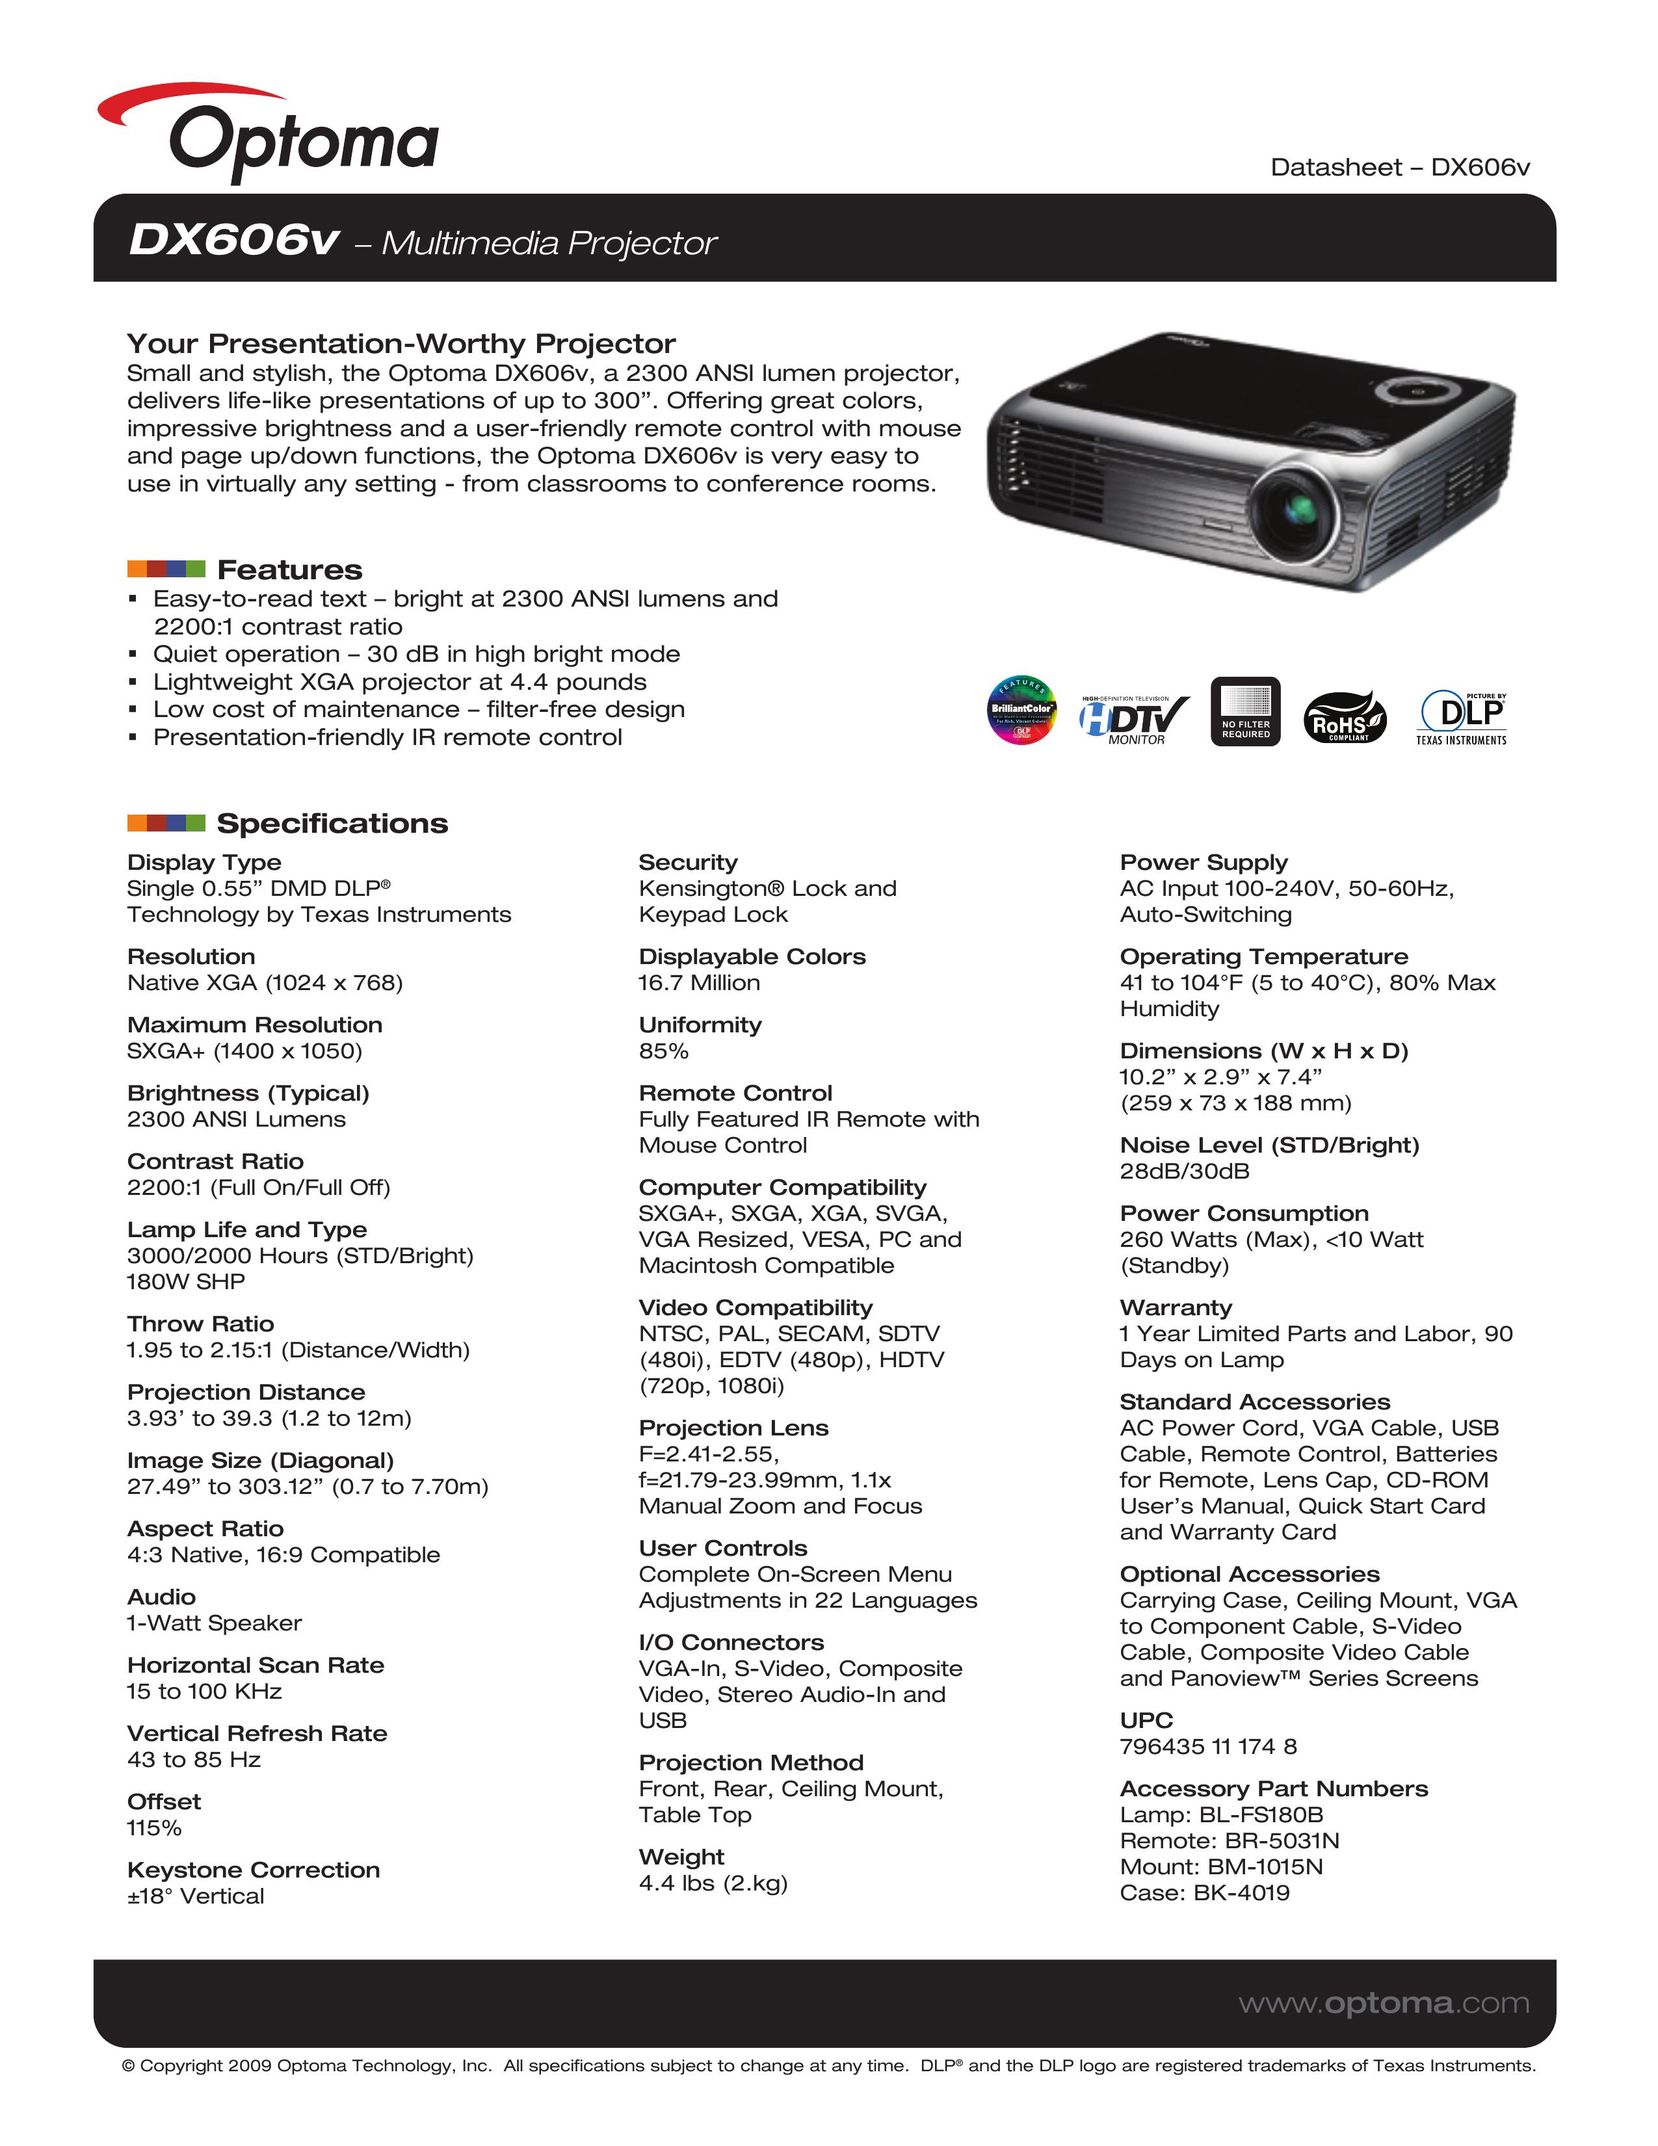 Optoma Technology DX606V Projector User Manual